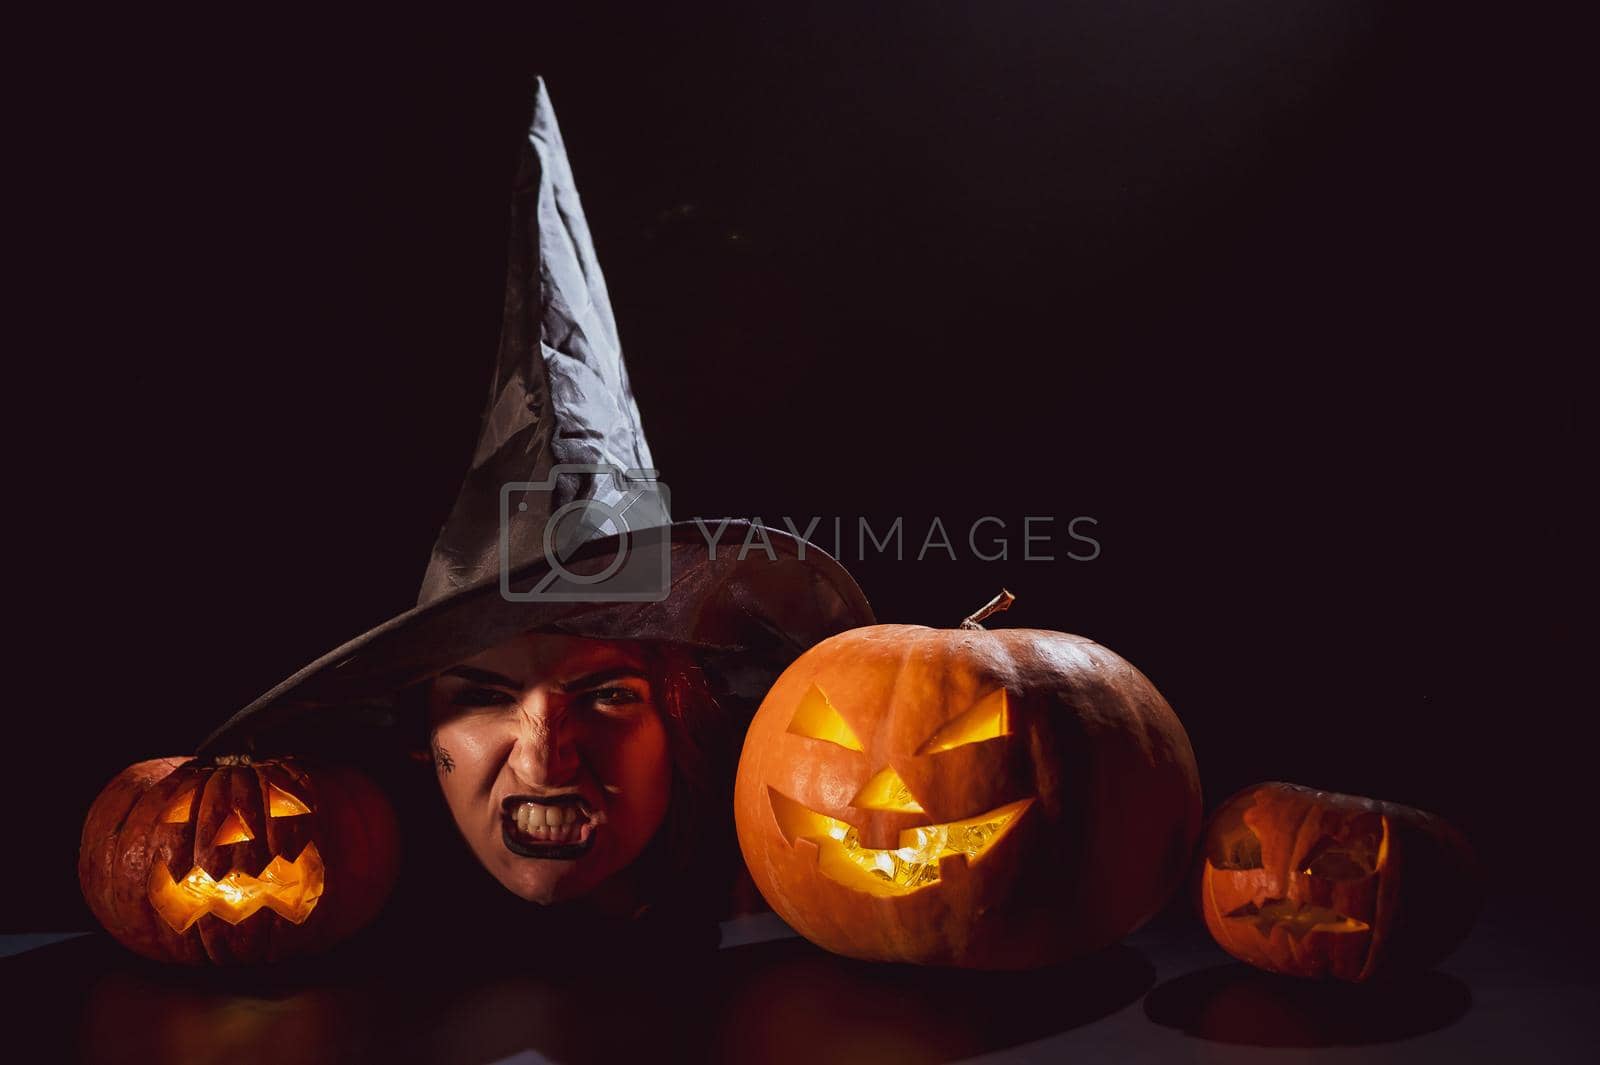 Royalty free image of The head of an evil witch is on the table next to the glowing pumpkin jack-o-lantern by mrwed54